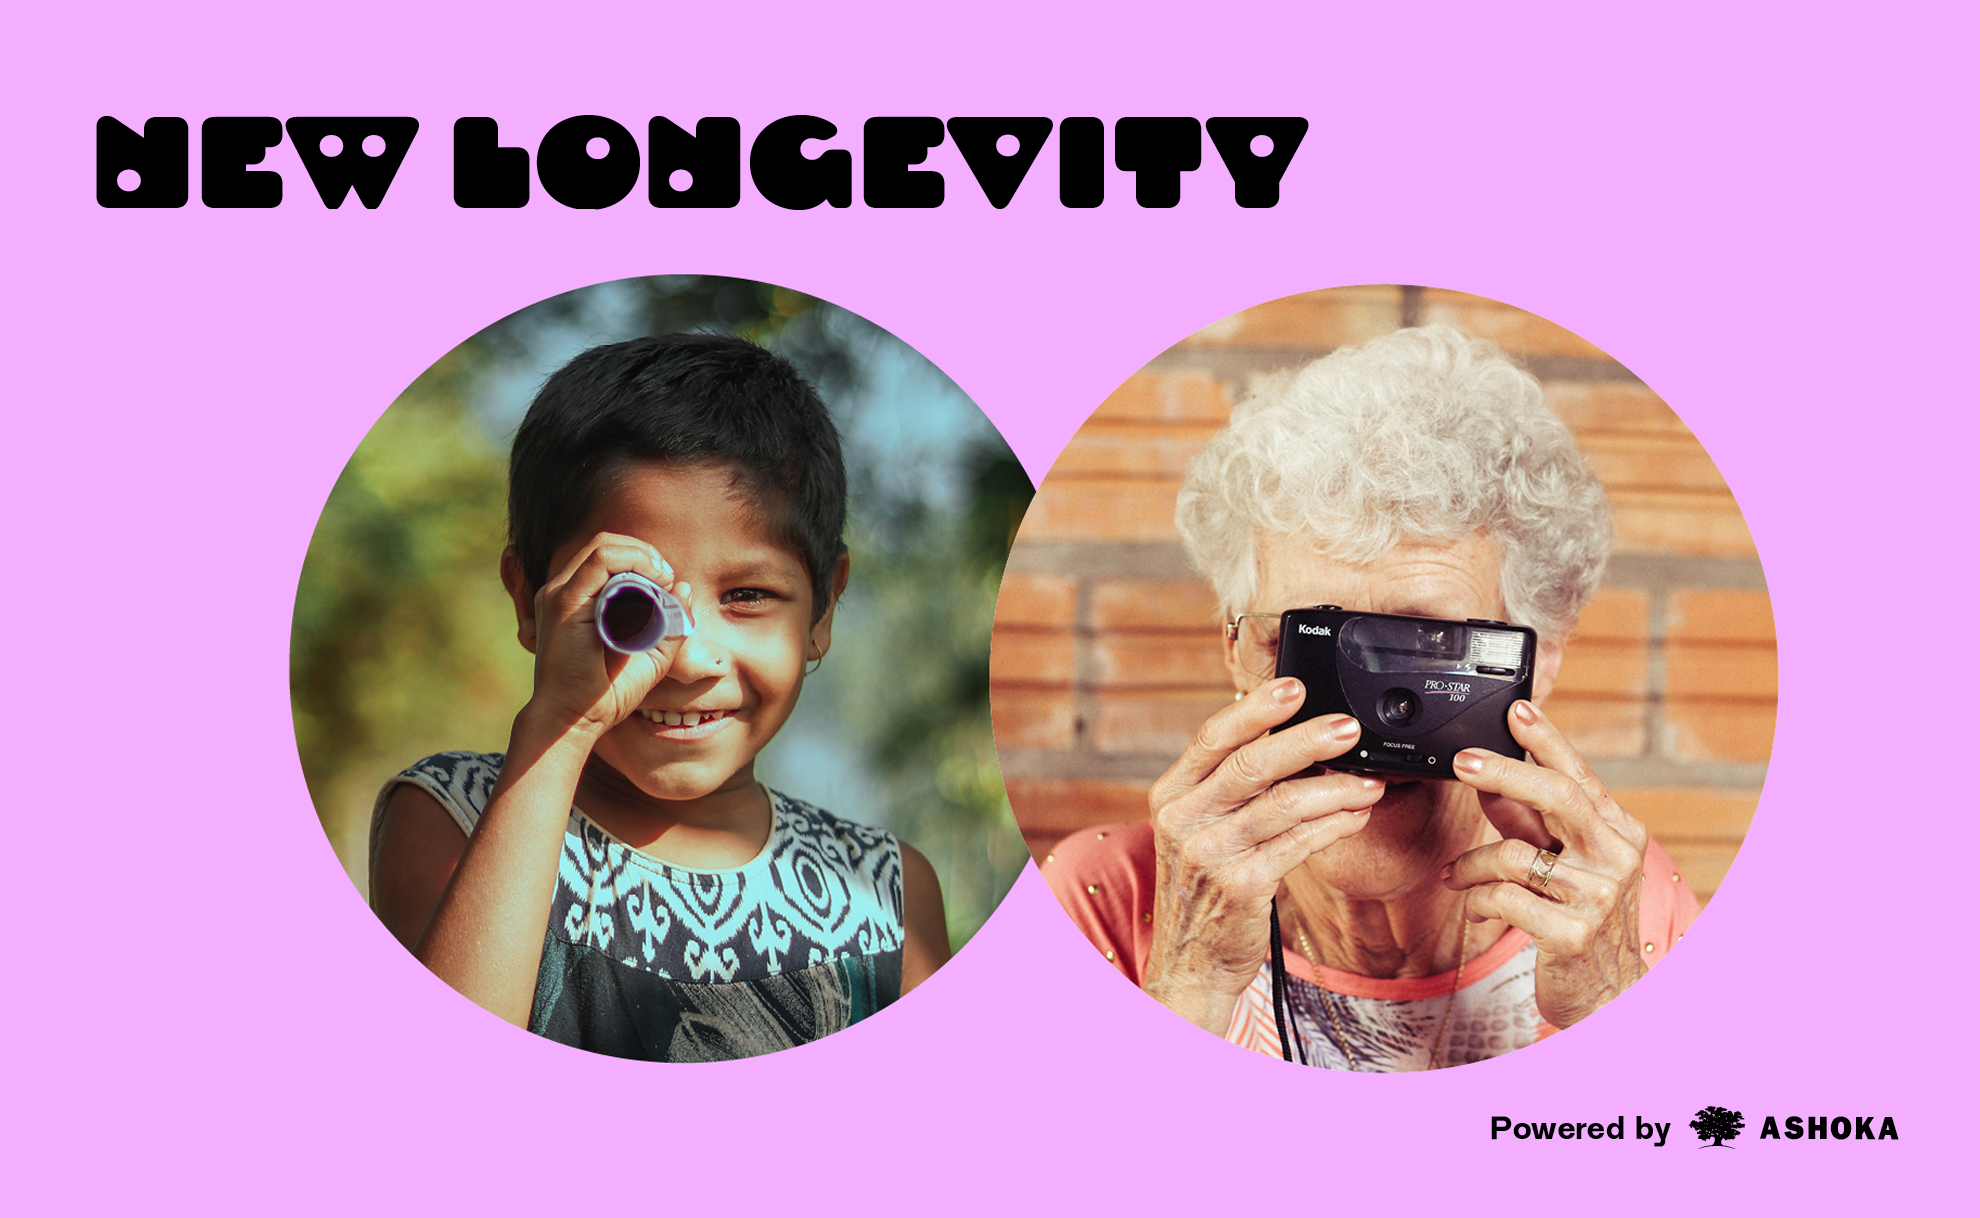 It reads new longevity by the picture of a boy looking through a lens and an old white lady behind a 90s photo camera